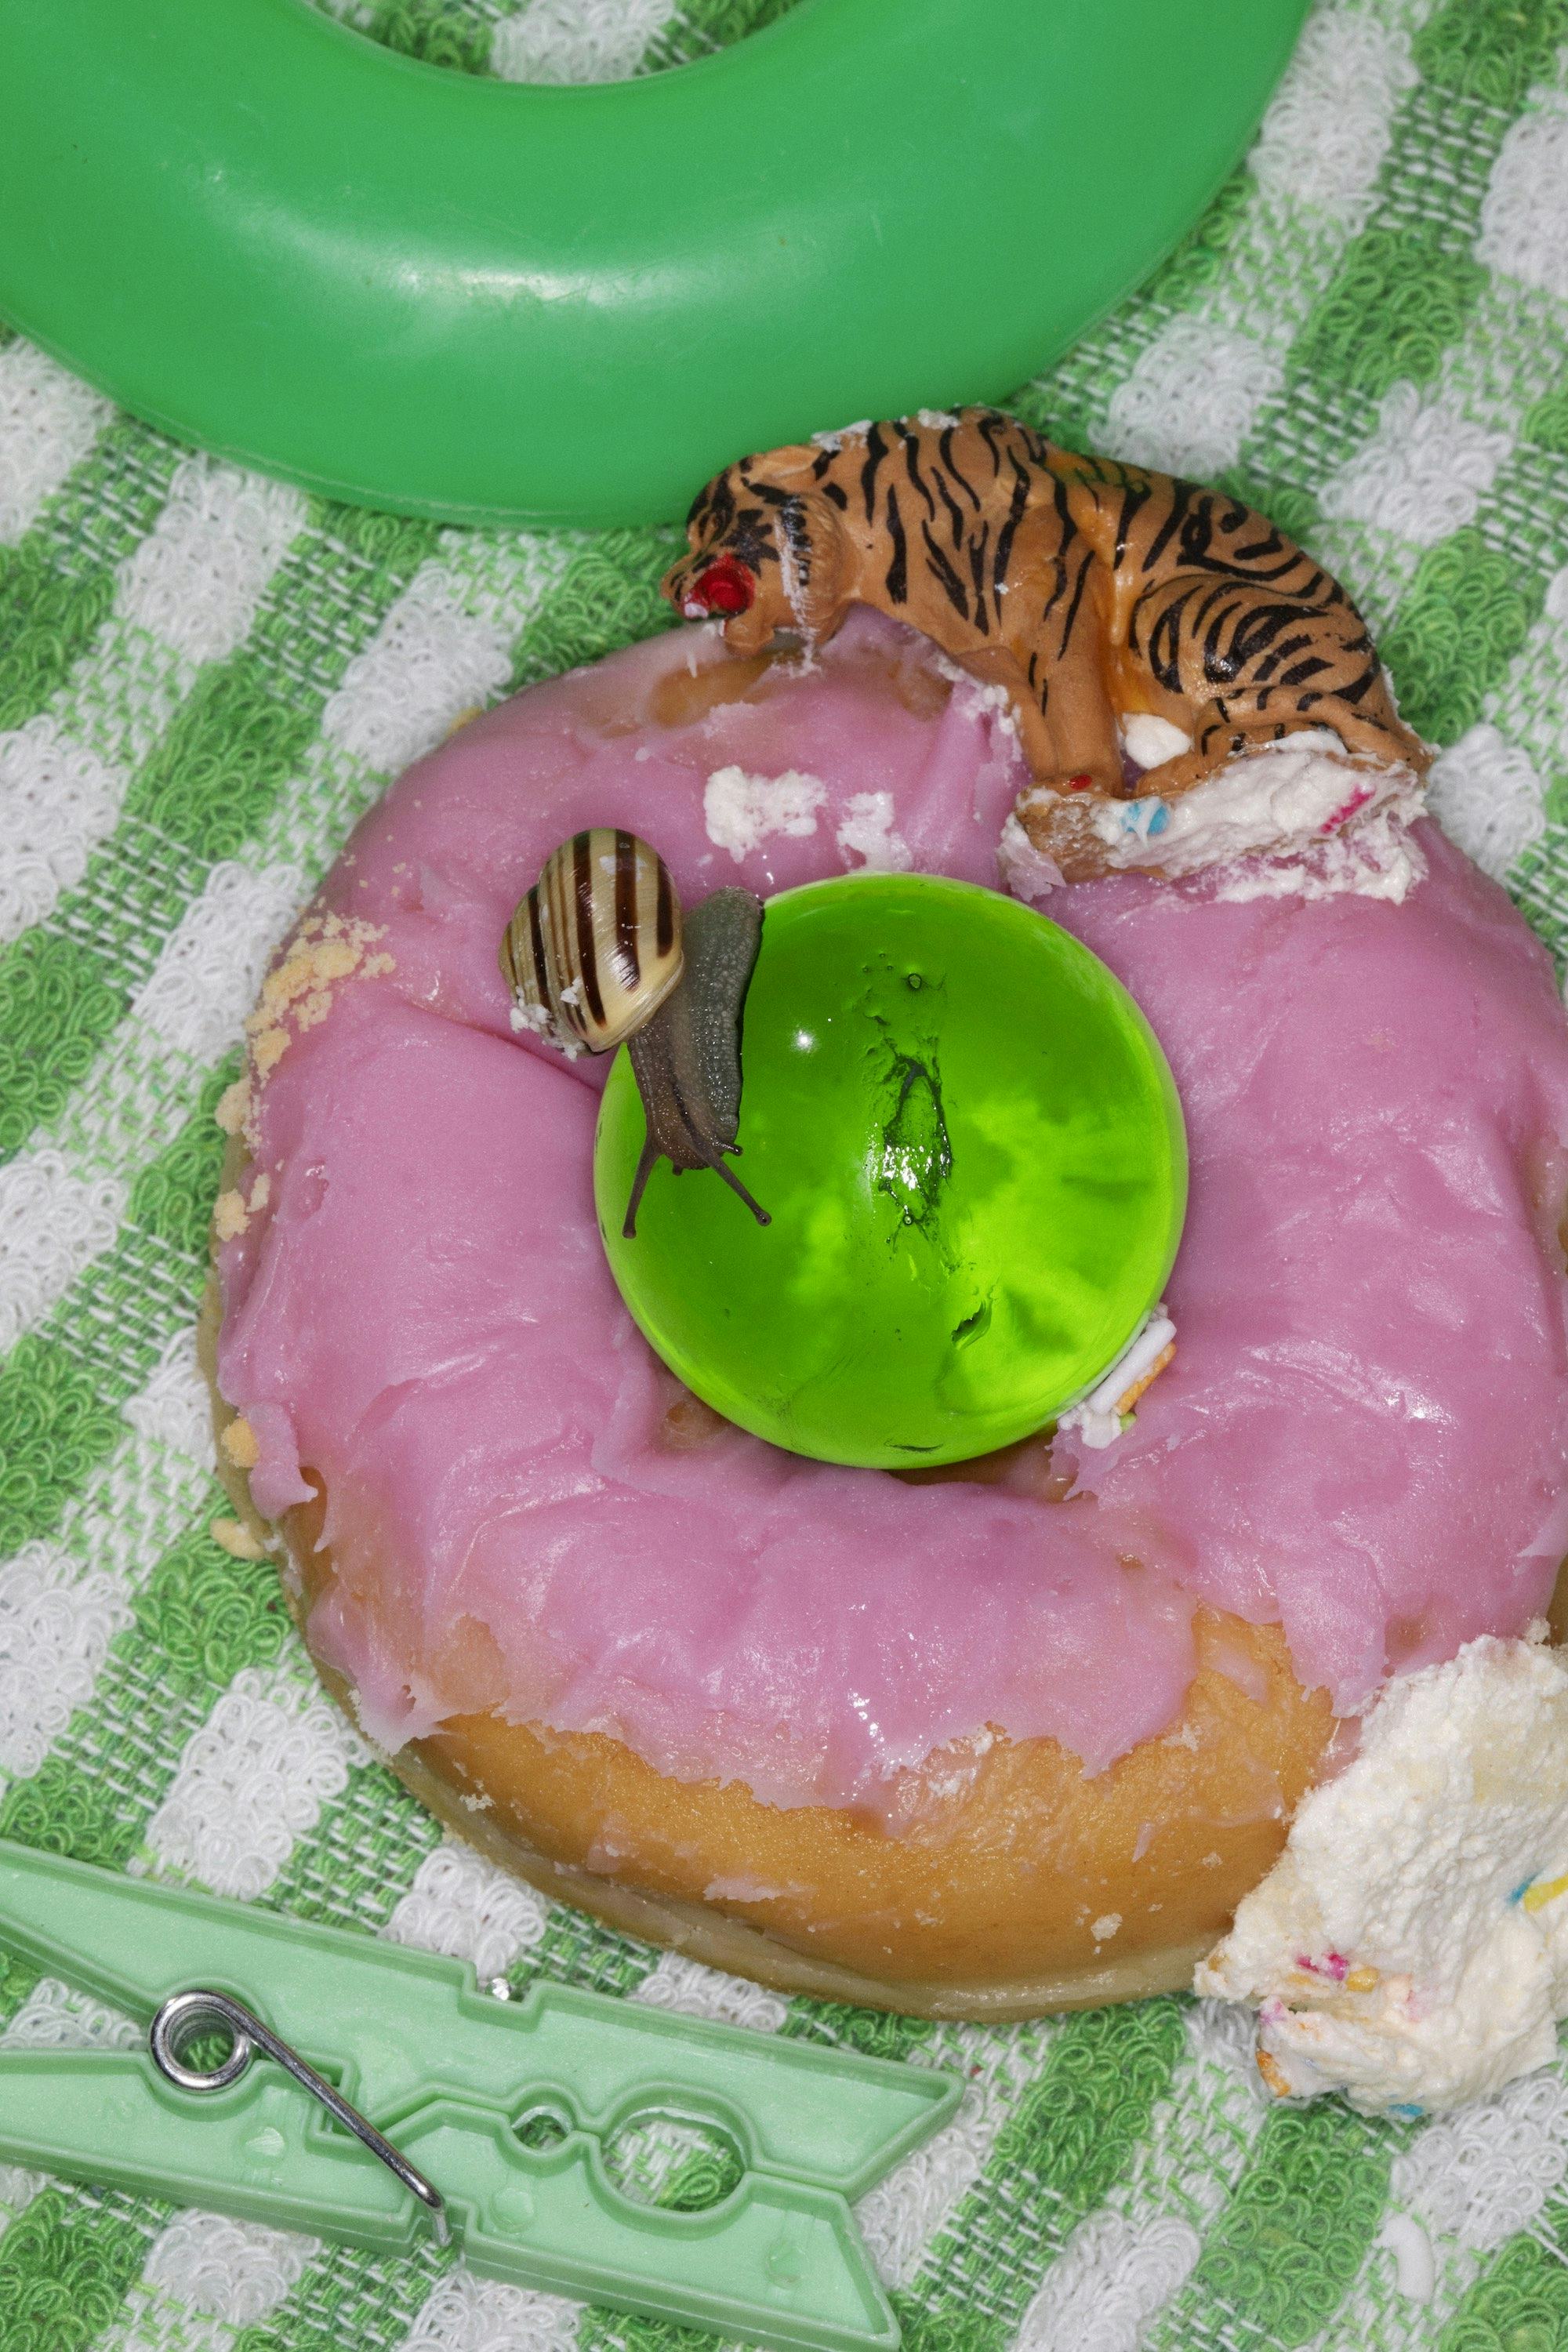 A photograph of a pink-glaced donut, on a green kitchen cloth, surrounded by a green cloth peg, a small toy tiger and a snail.